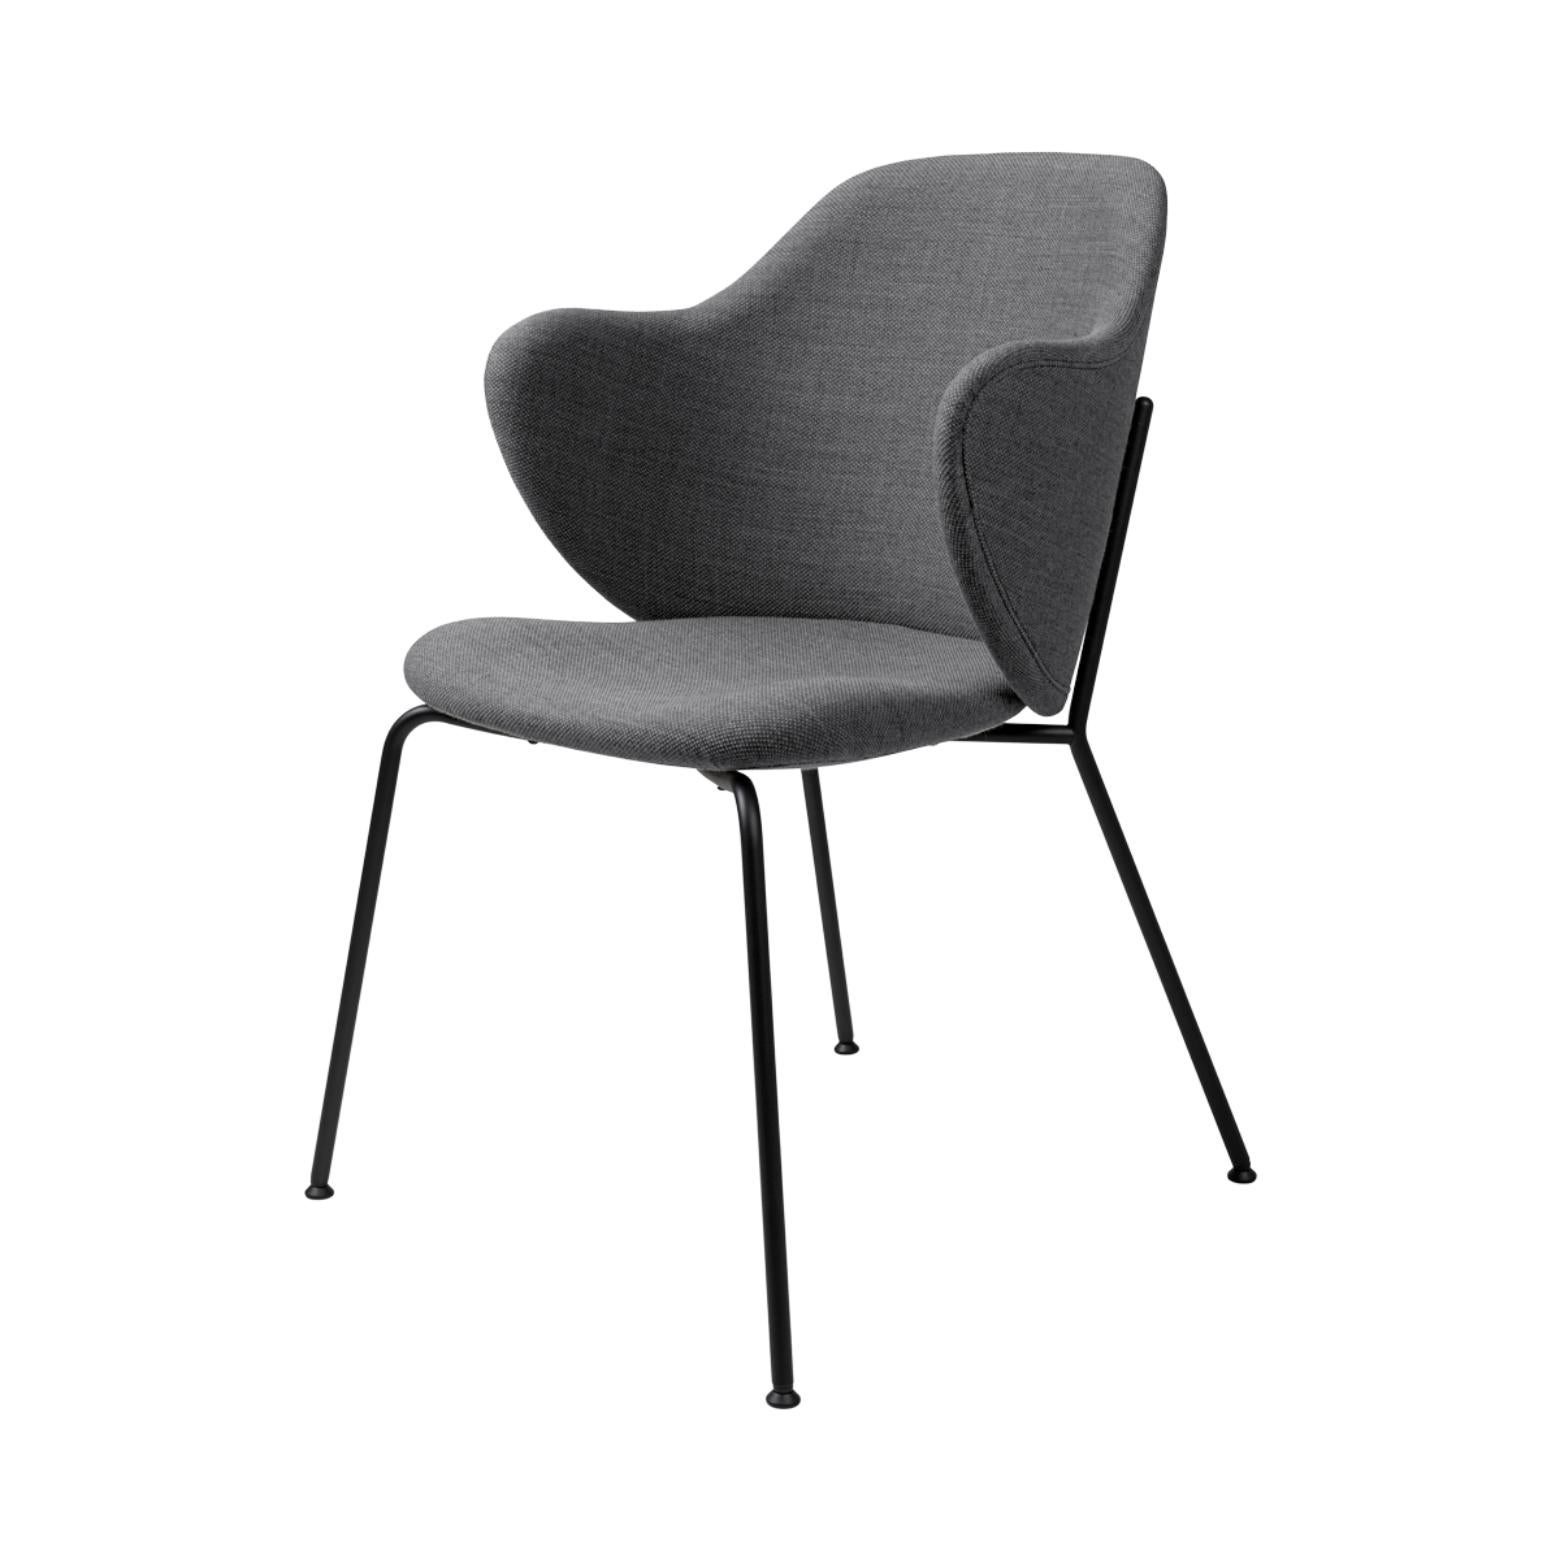 Dark grey Fiord lassen chair by Lassen
Dimensions: w 58 x d 60 x h 88 cm 
Materials: Textile

The Lassen chair by Flemming Lassen, Magnus Sangild and Marianne Viktor was launched in 2018 as an ode to Flemming Lassen’s uncompromising approach and